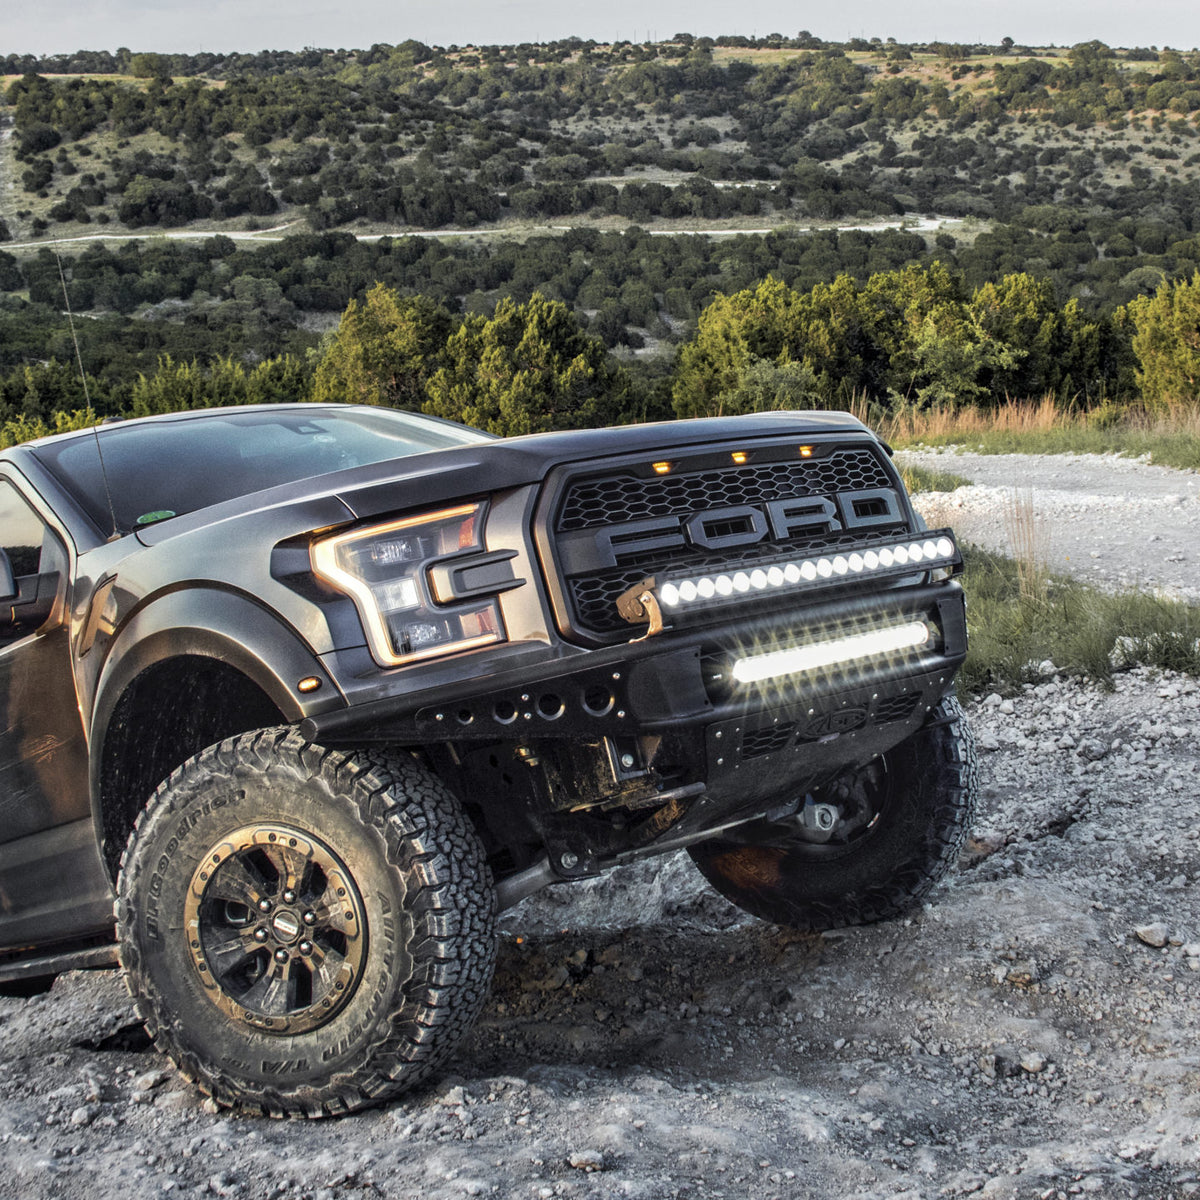 The Best Accessories Your Ford Truck | DECKED®